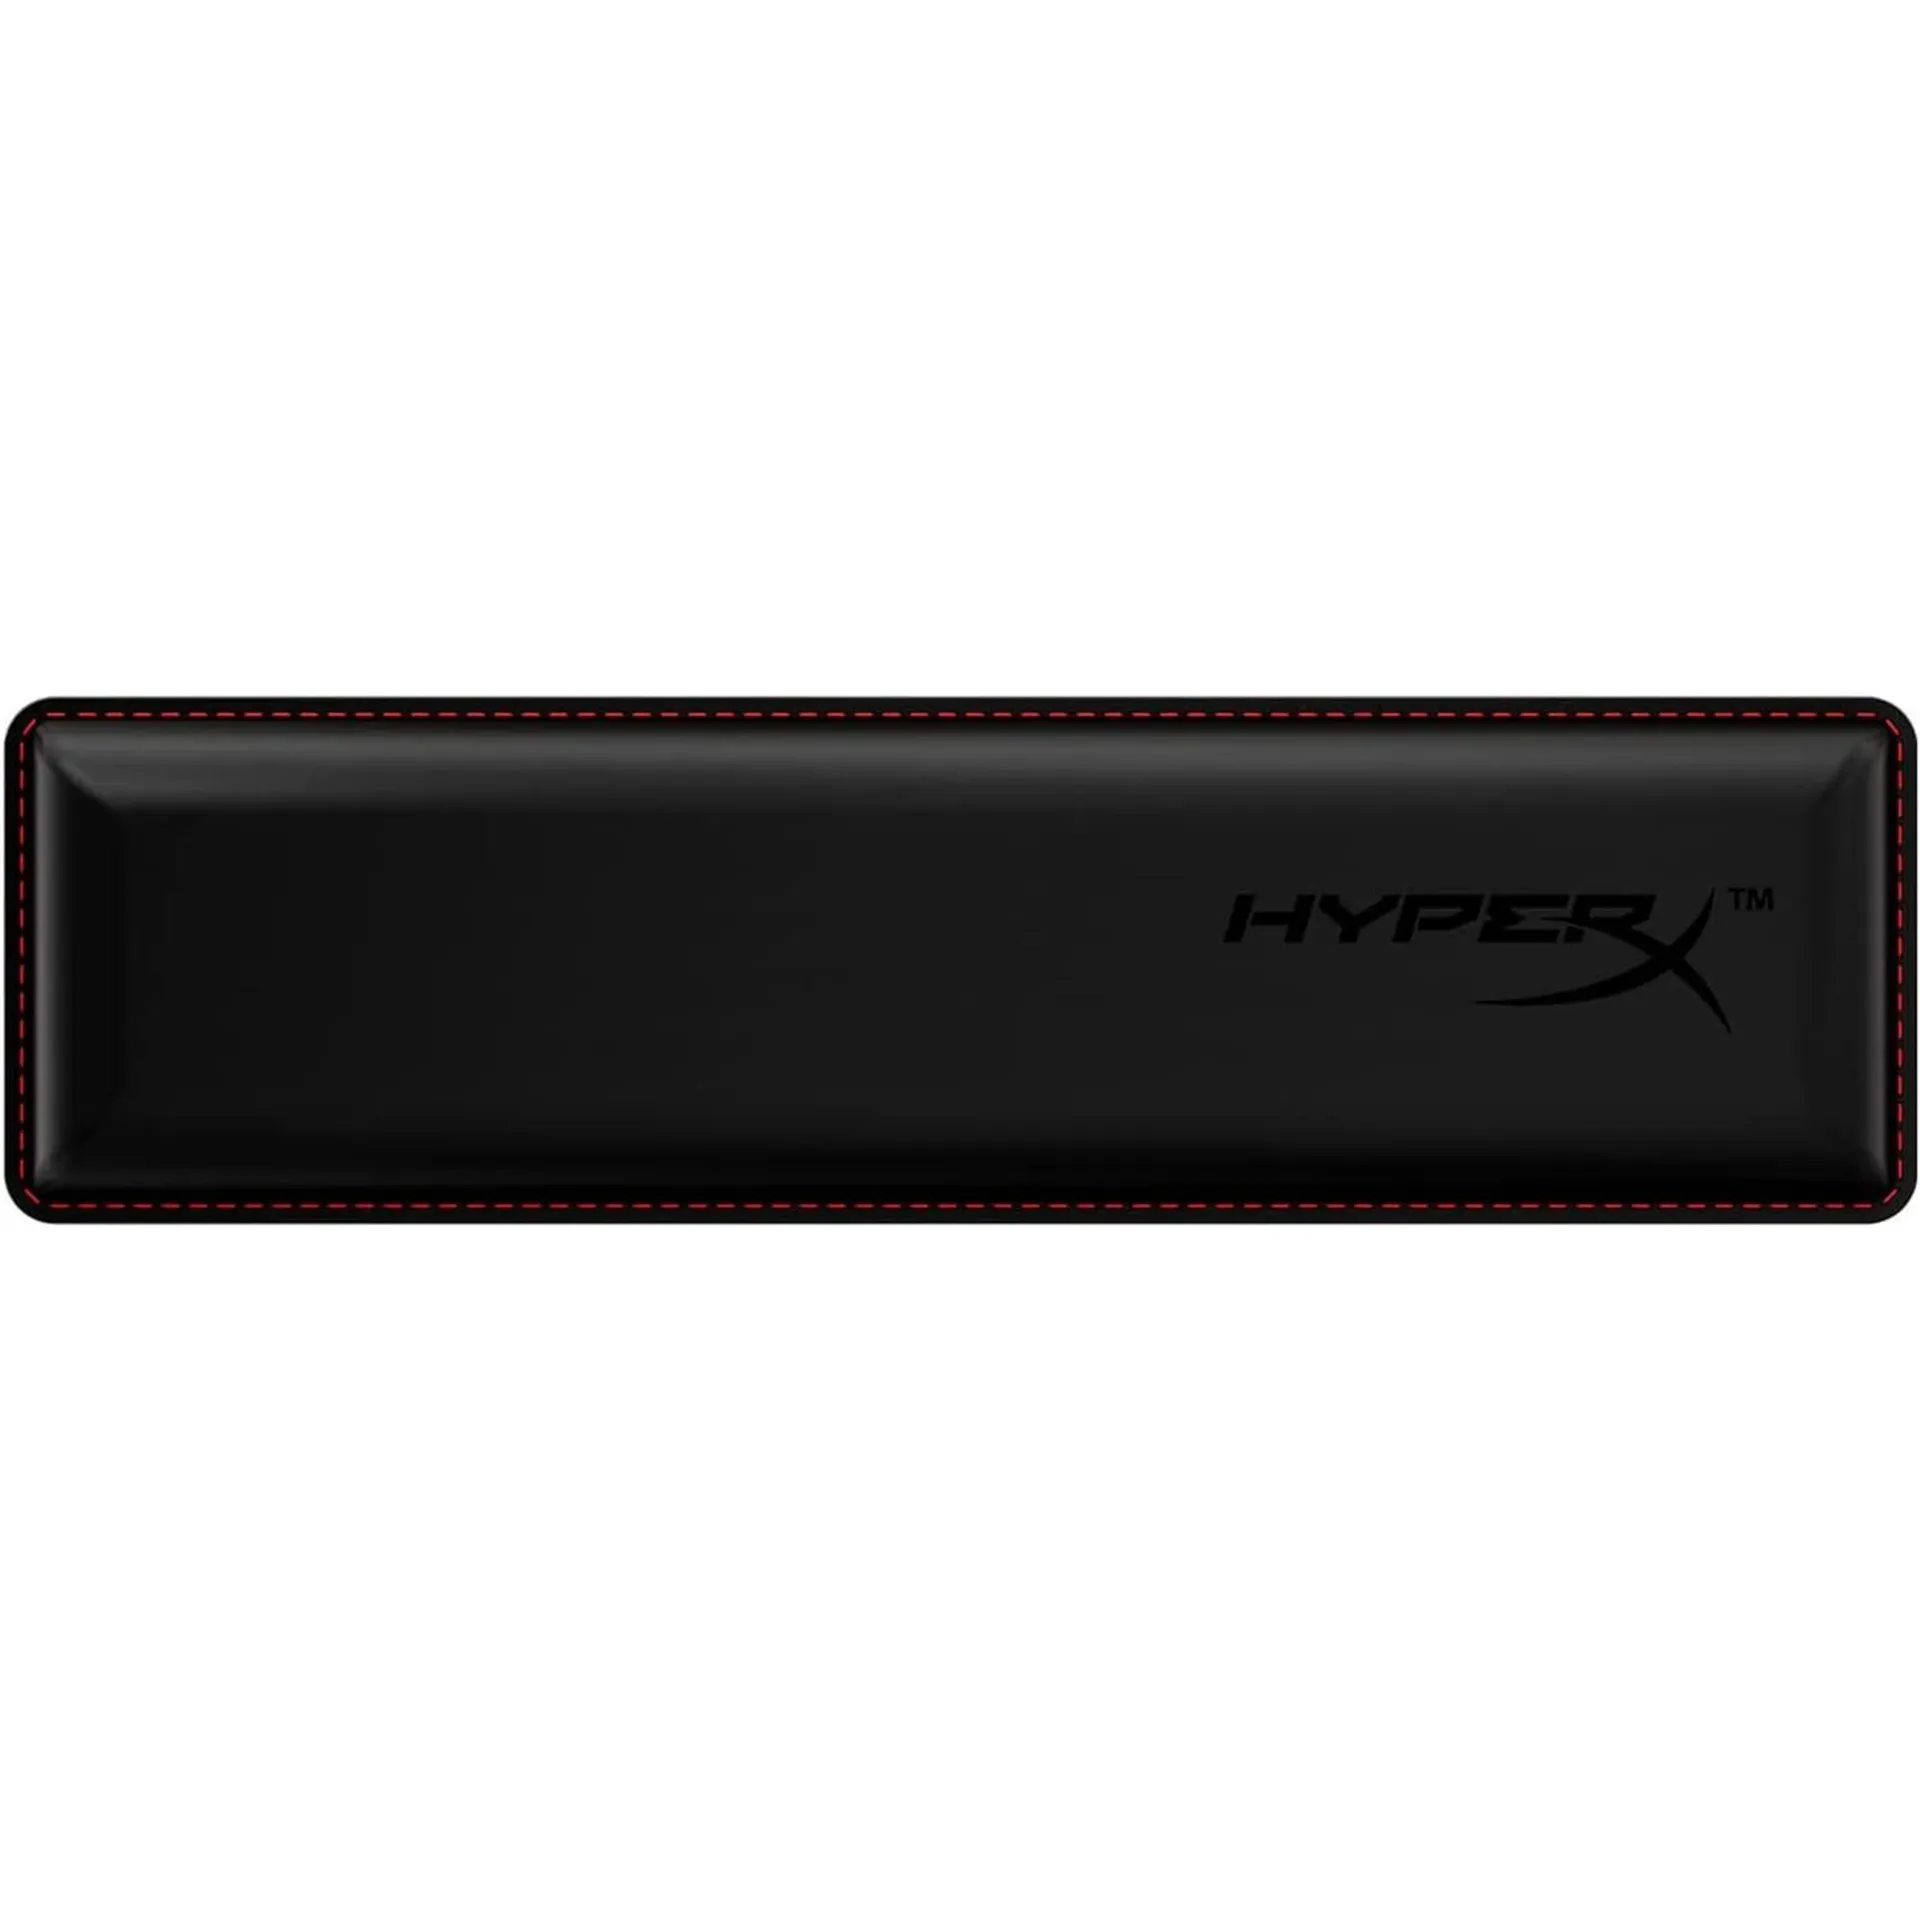 HyperX Wrist Rest For Compact 60 65 Keyboard